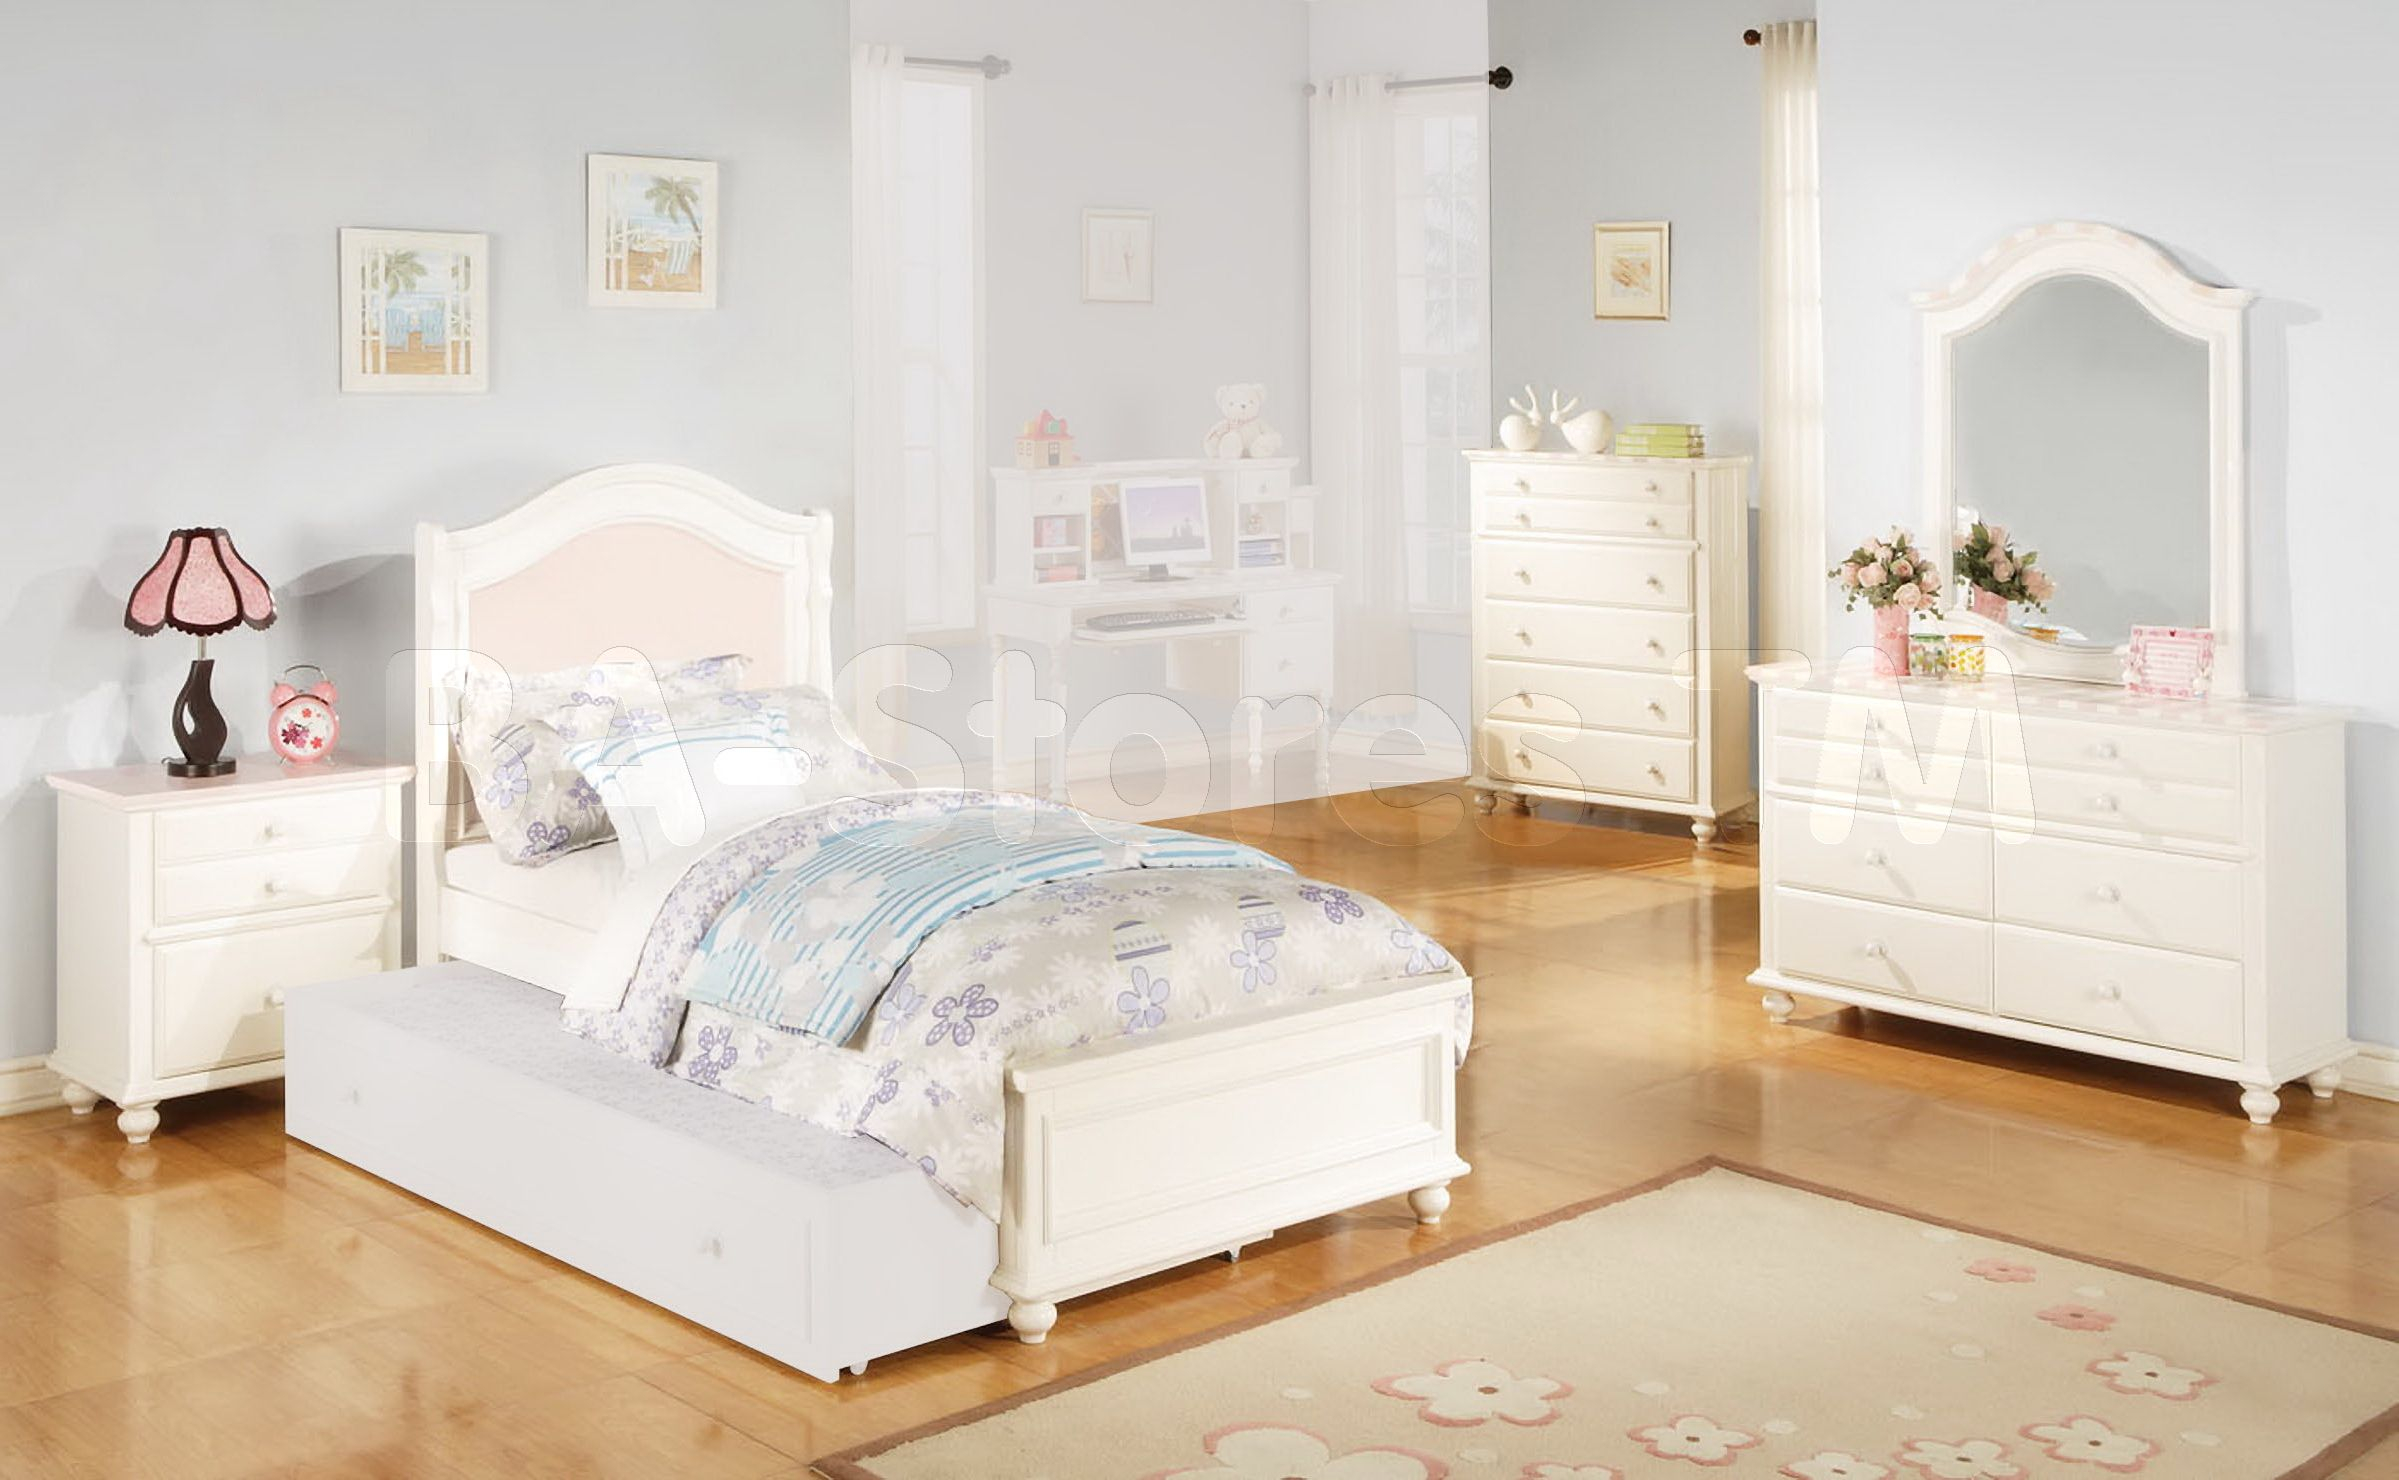 30 Best Photo Of White Bedroom Furniture Ideas Bedroom Furniture throughout dimensions 2399 X 1480